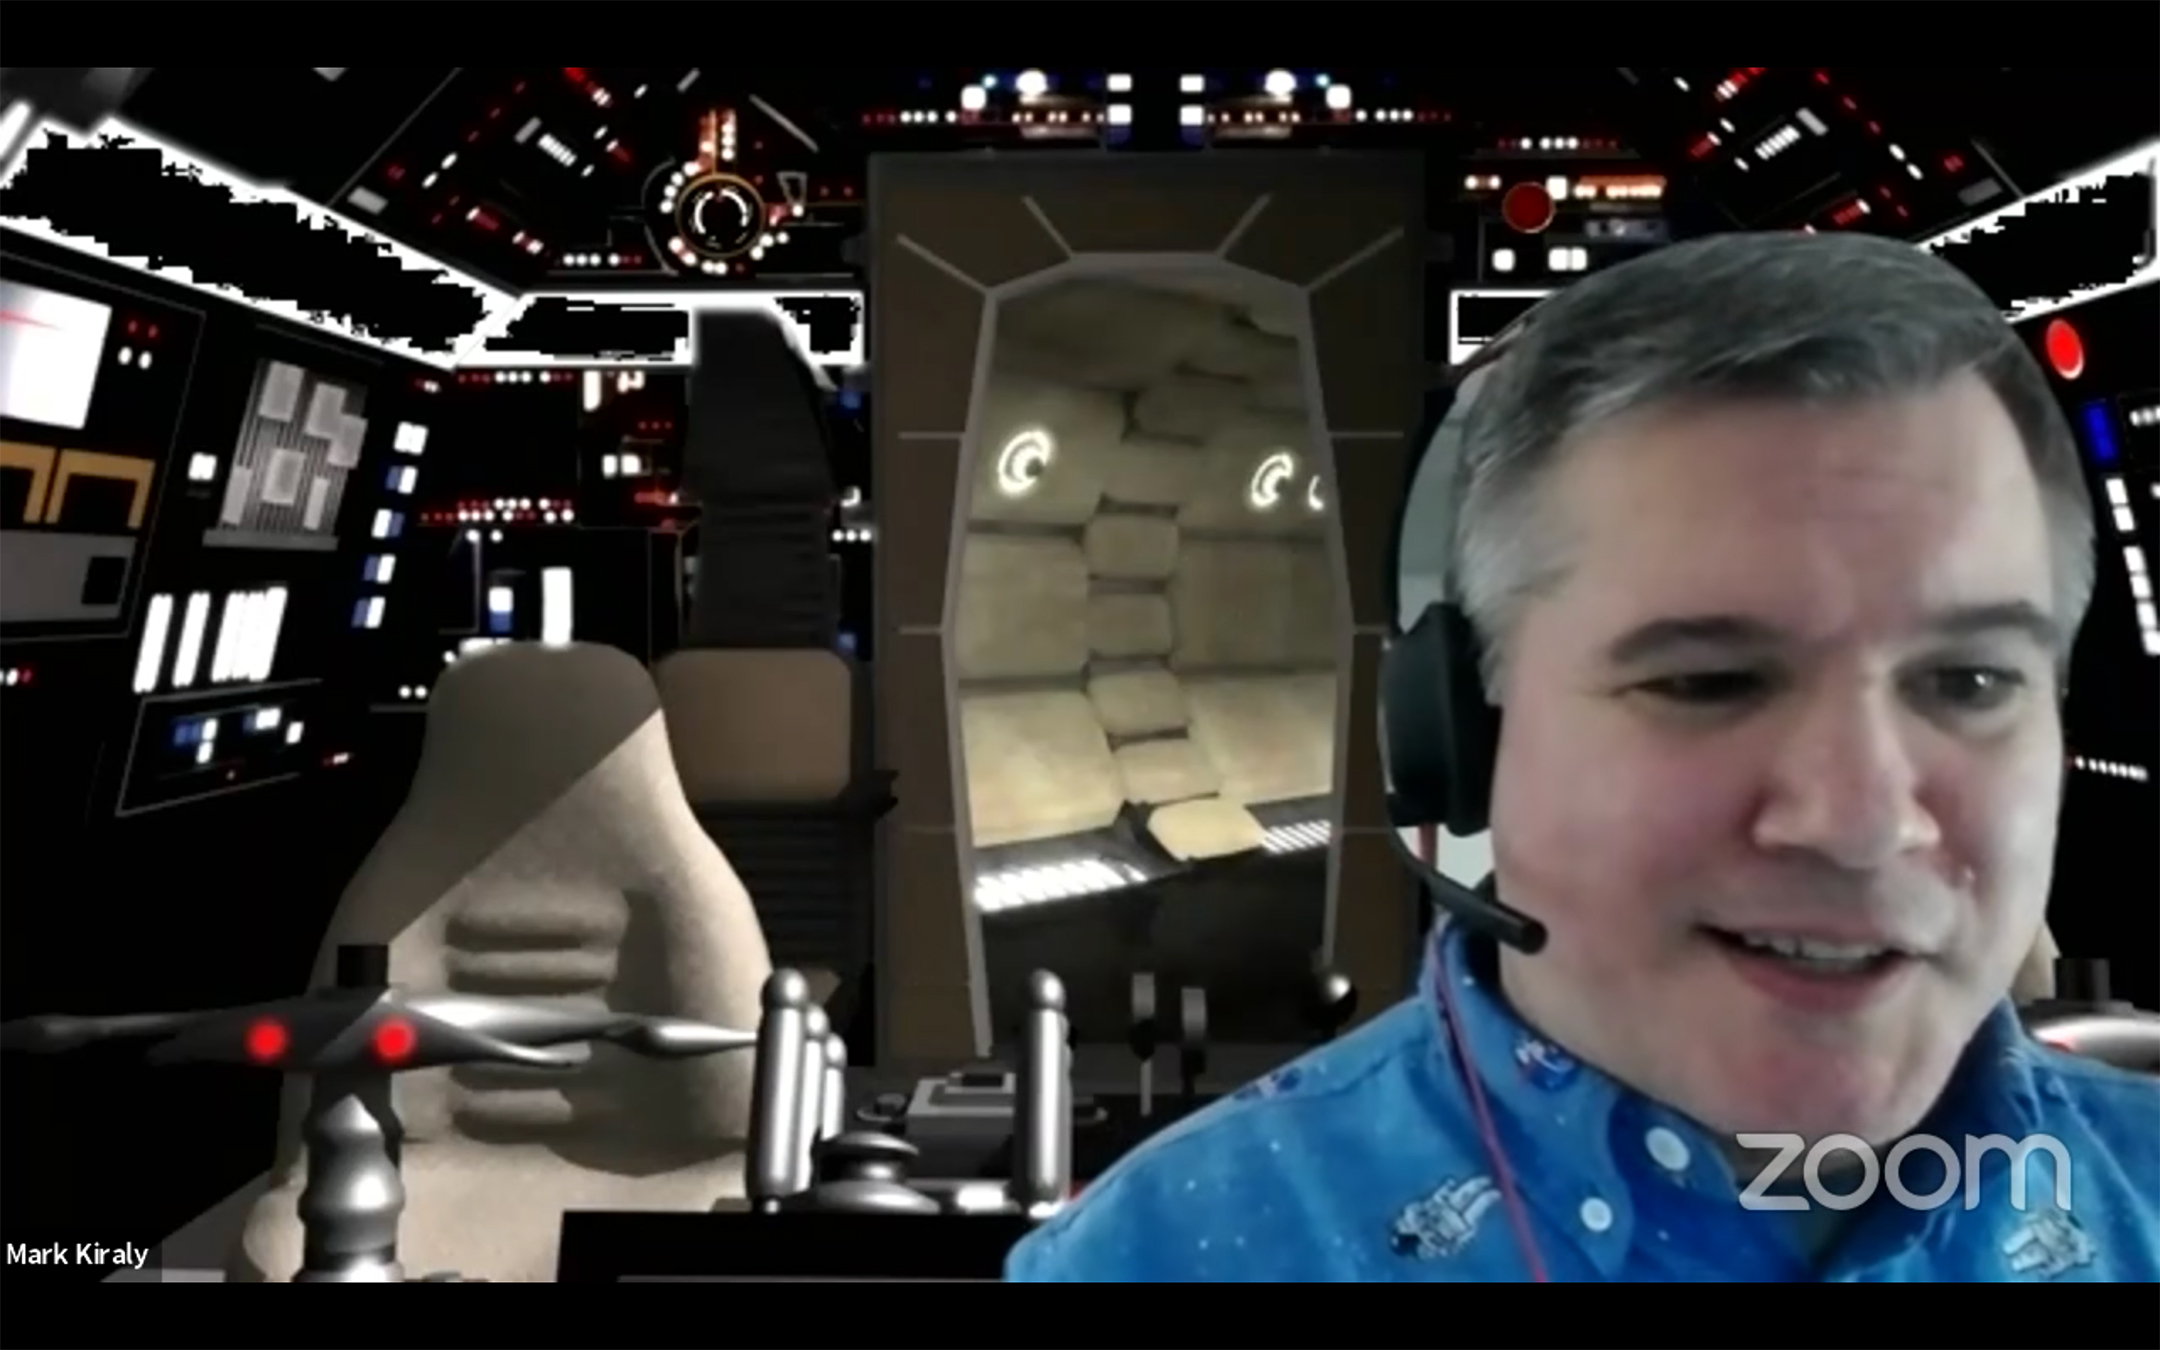 a screenshot from a virtual AP Calculus AB class showing teacher Mark Kiraly in front of a Millennium Falcon cockpit background